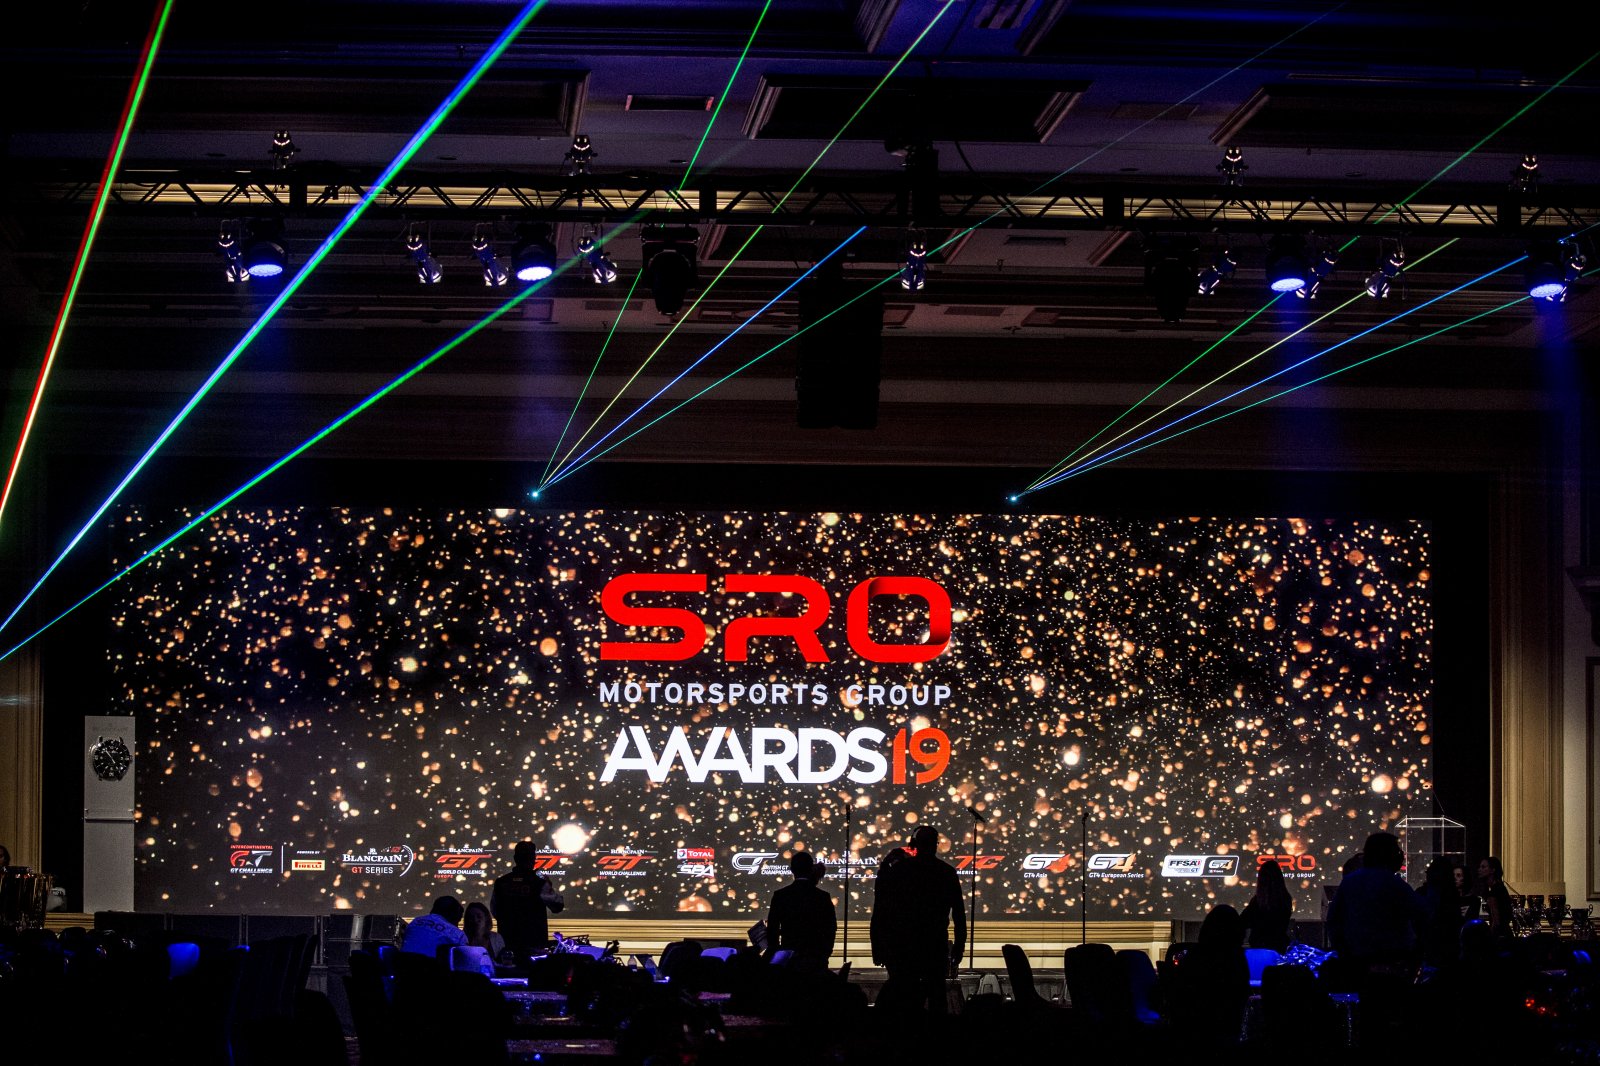 Champions of 2019 crowned at spectacular SRO Motorsports Group awards ceremony in Las Vegas